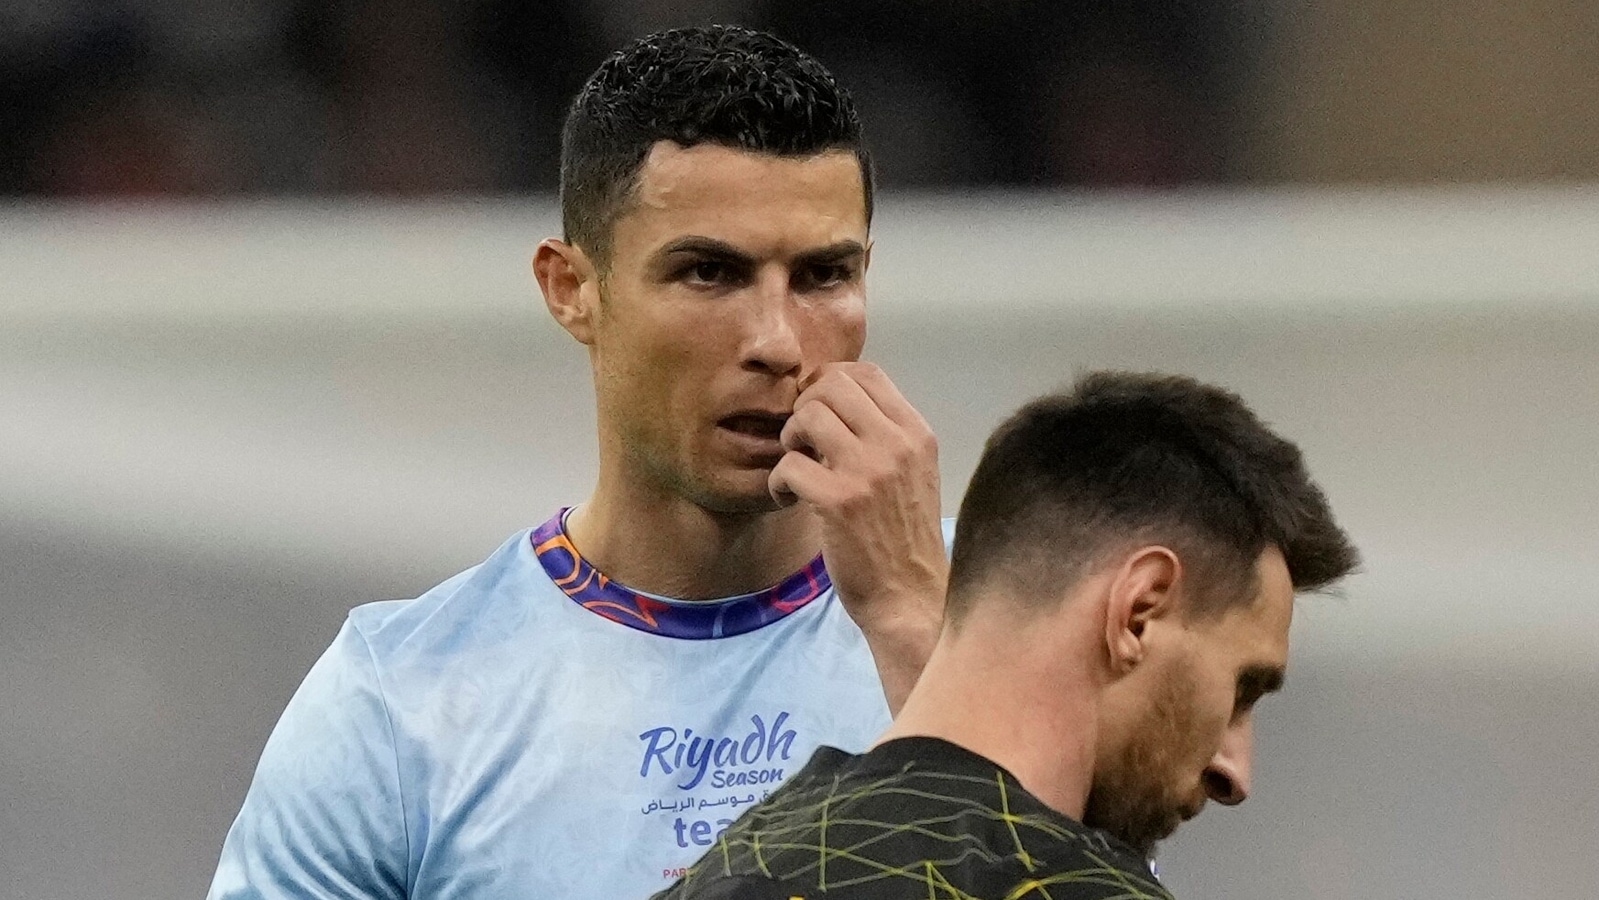 Reunion of the GOATS! A look at Cristiano Ronaldo, Lionel Messi's